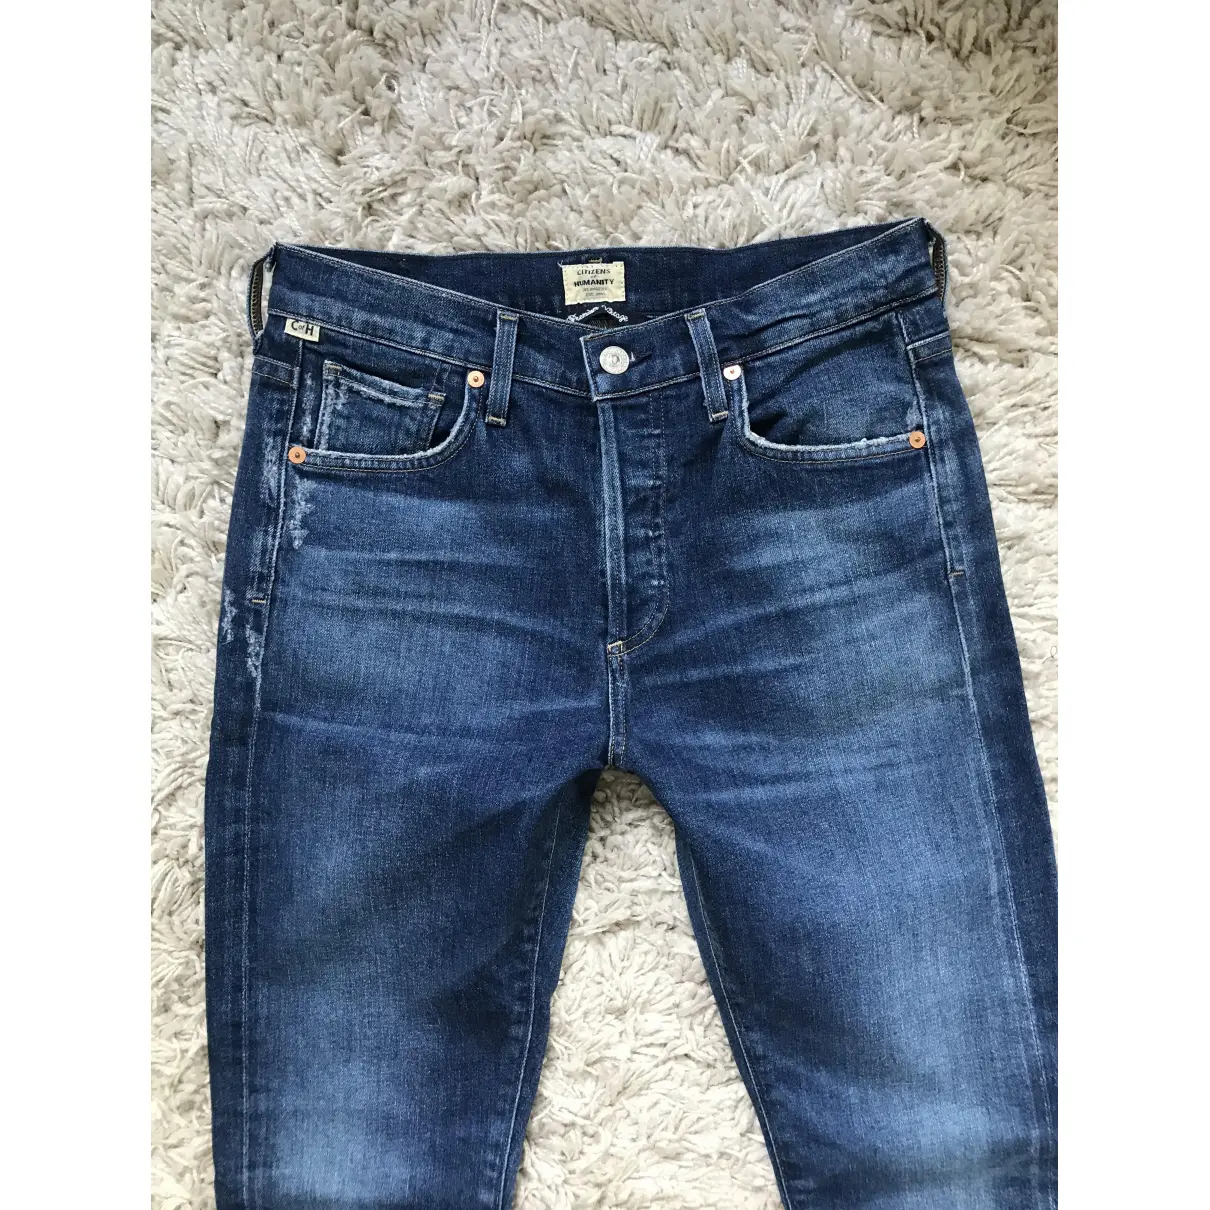 Buy Citizens Of Humanity Slim jeans online